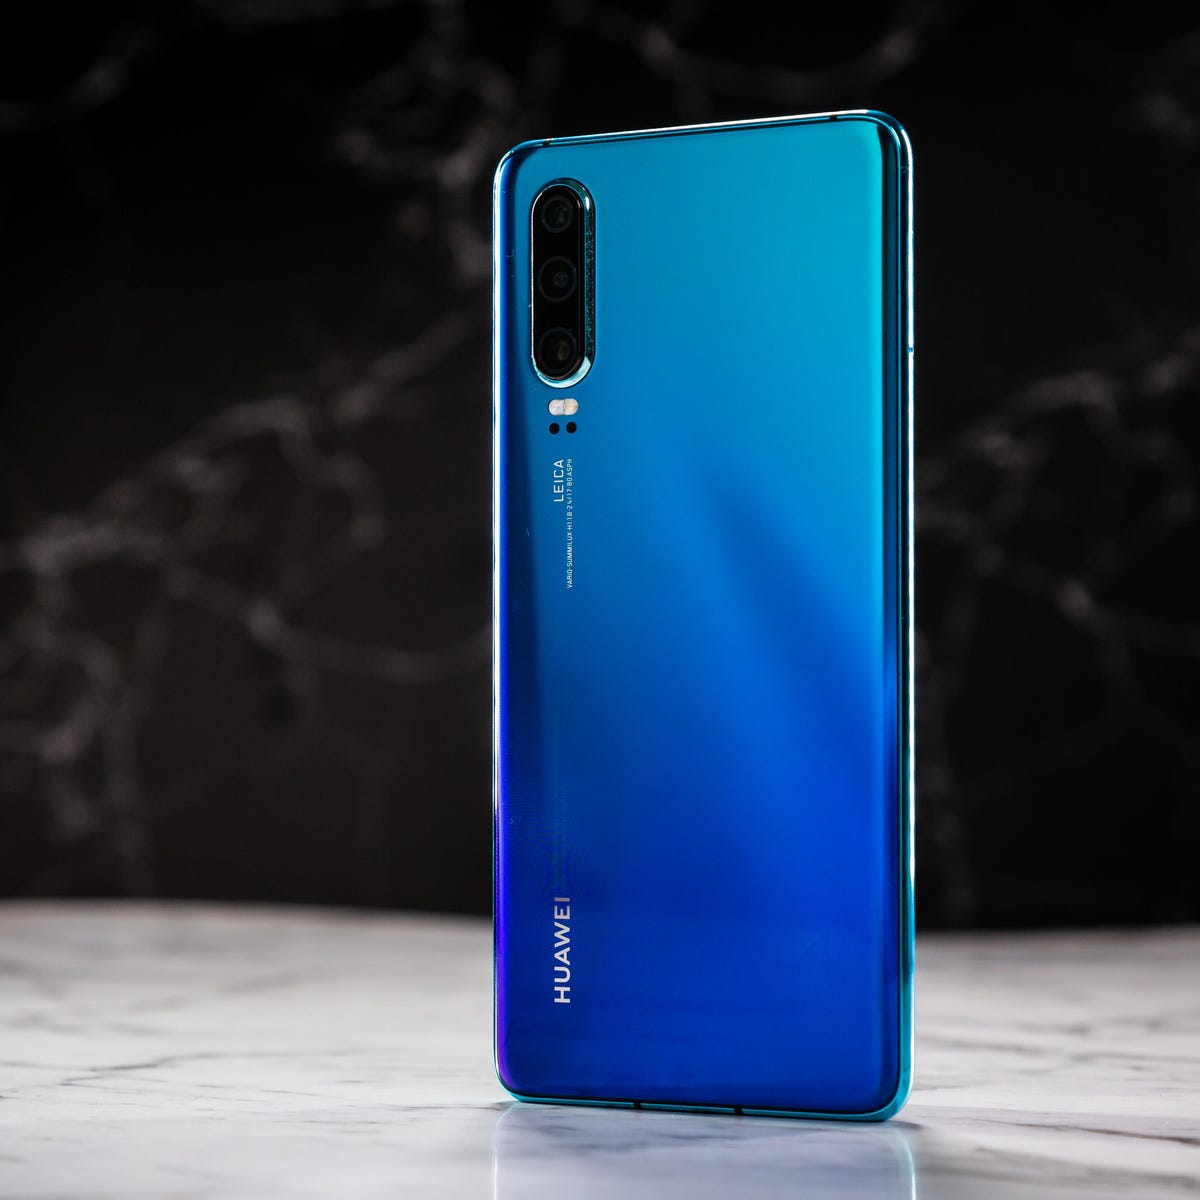 Rendition Svømmepøl bestille Huawei P30 review: This phone takes ridiculous photos for a reasonable  price - CNET